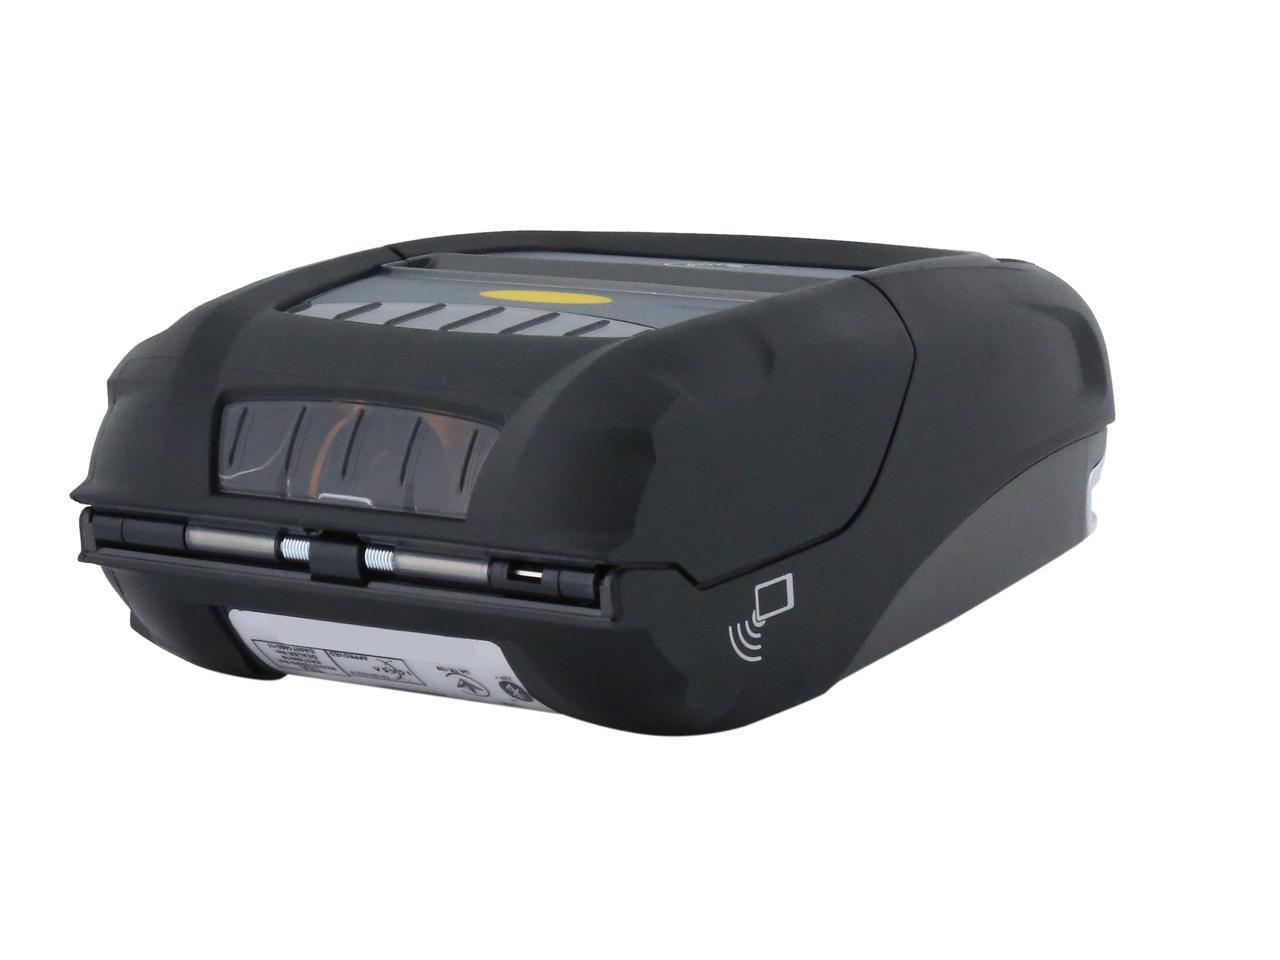 Zebra Zq510 3 Mobile Direct Thermal Receipt And Label Printer 203 Dpi Bluetooth 40 Linered 4894